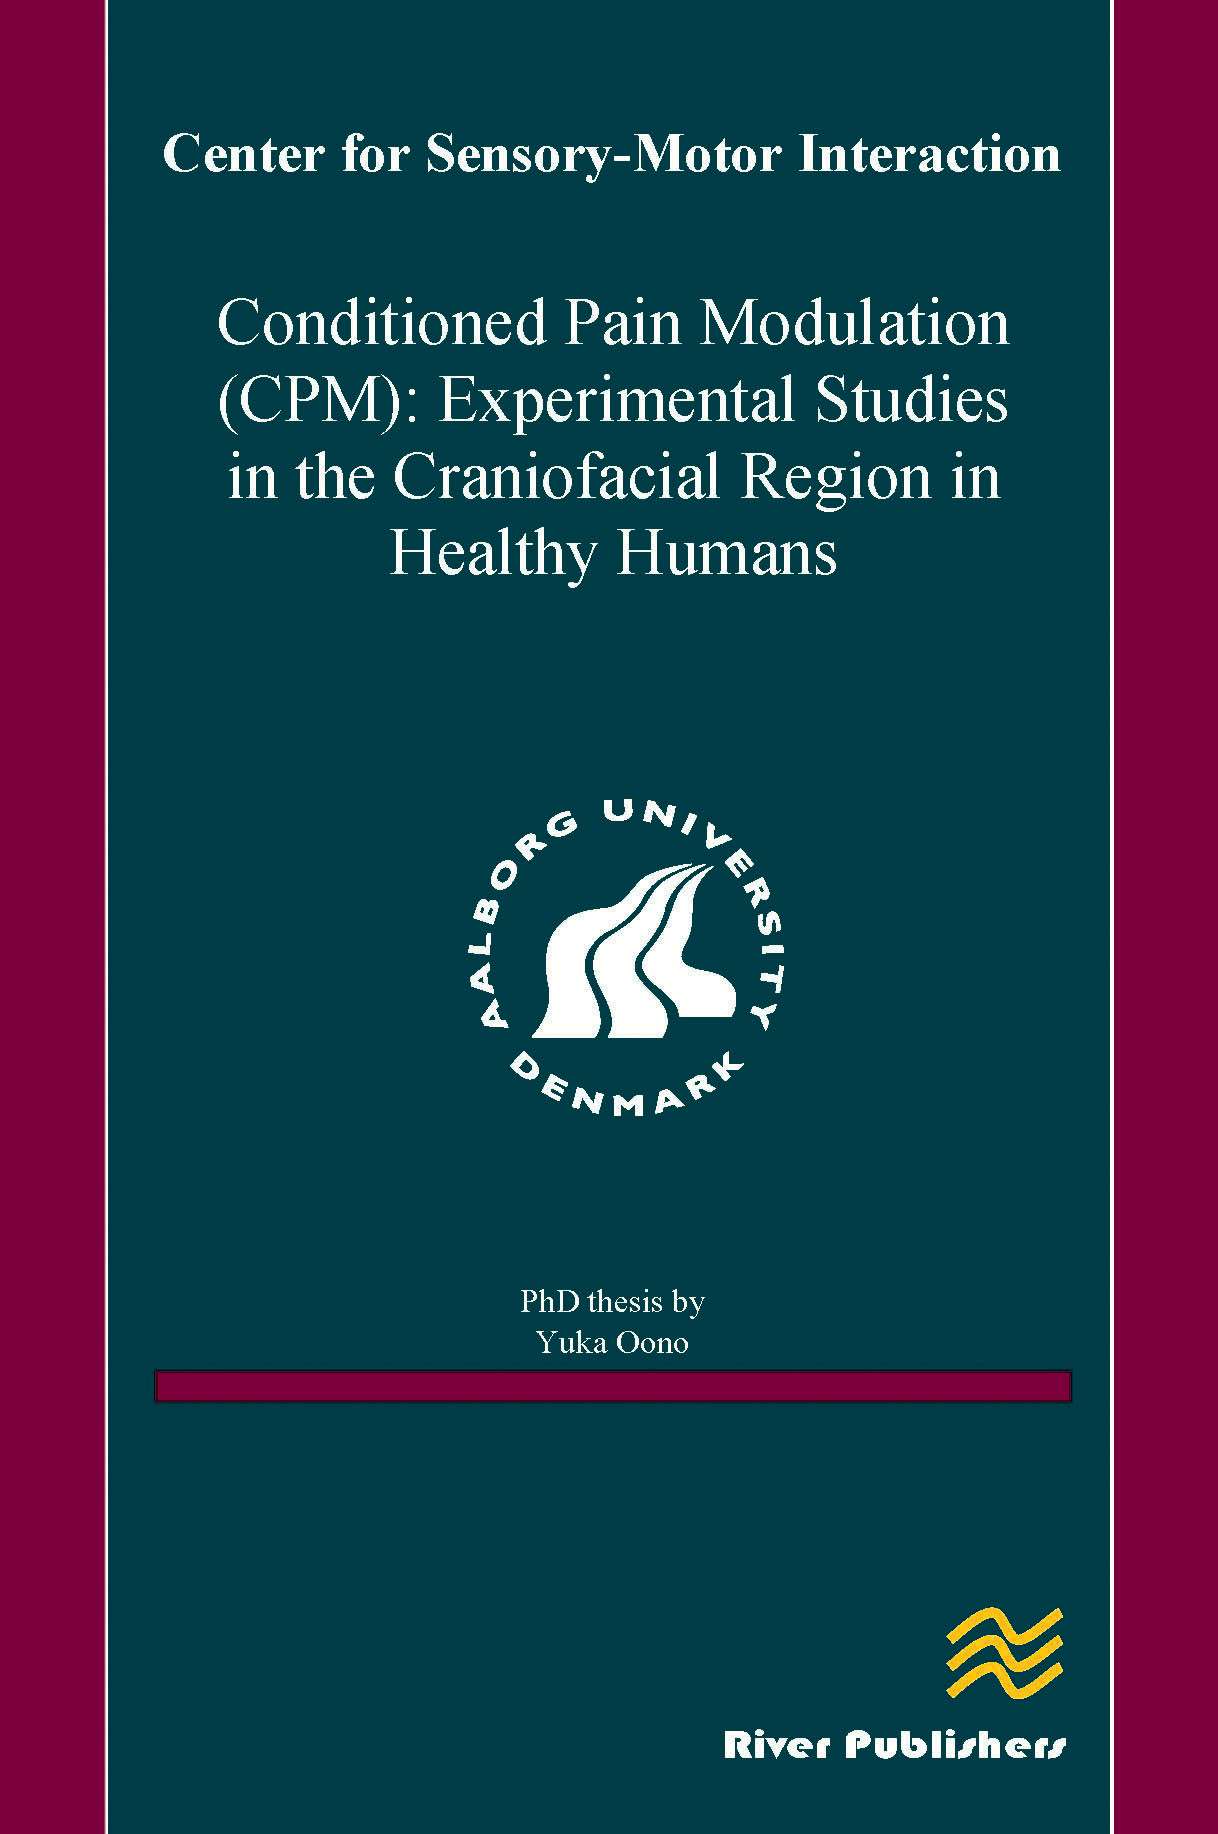 Conditioned Pain Modulation (CPM): Experimental Studies in the Craniofacial Region in Healthy Humans